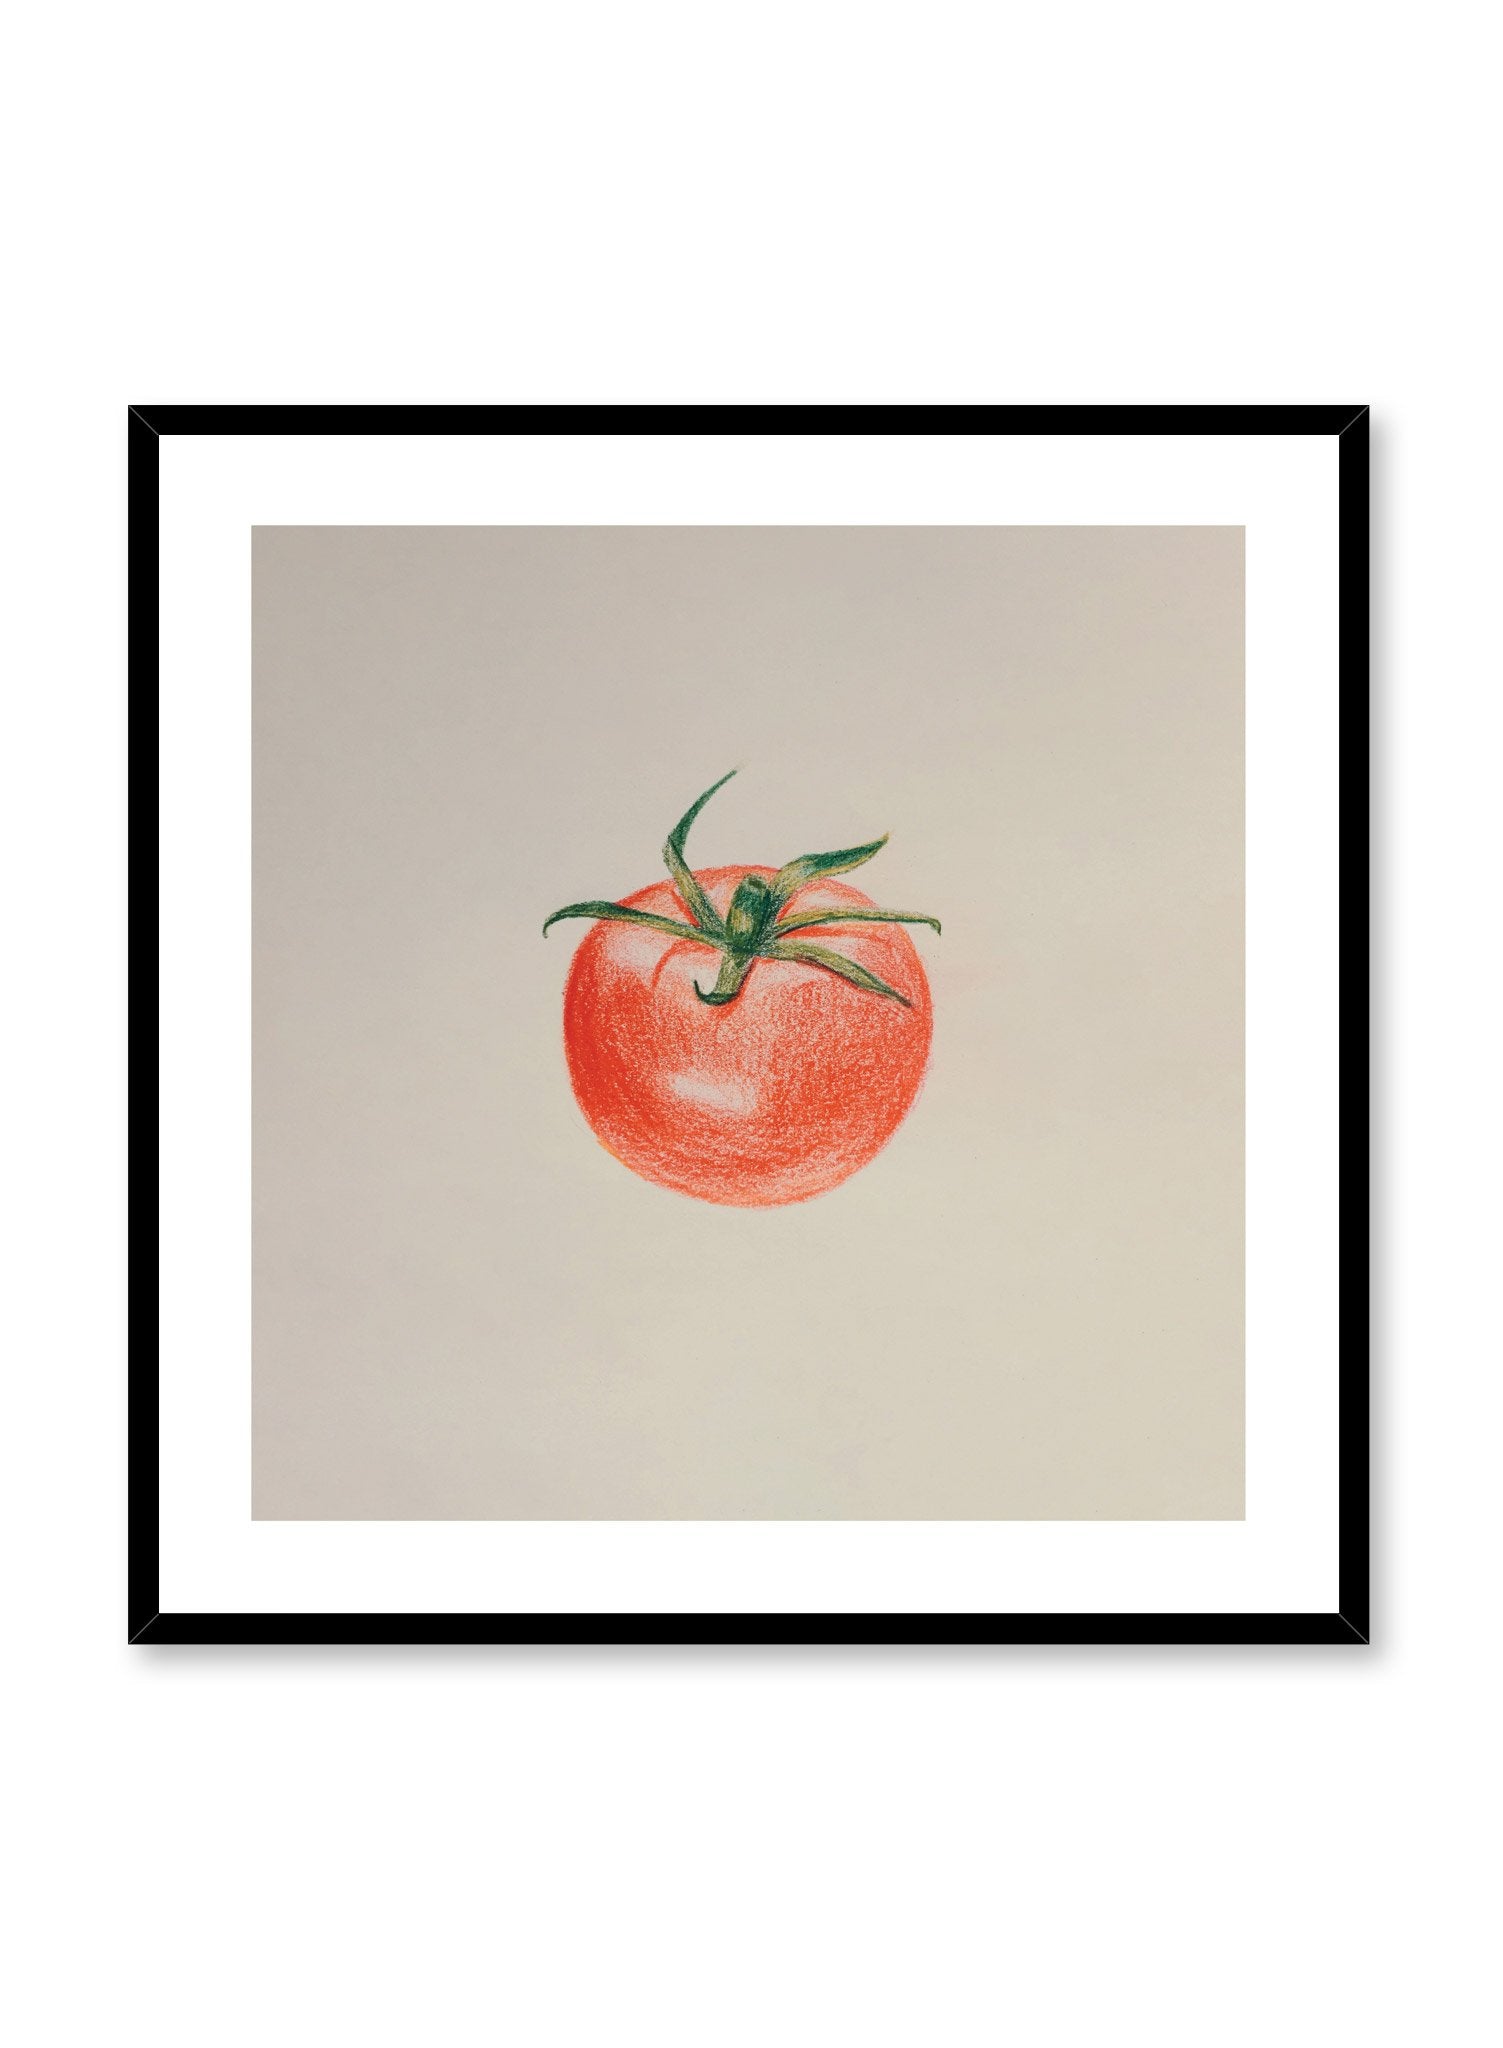 Minimalist poster by Opposite Wall with tomato food illustration